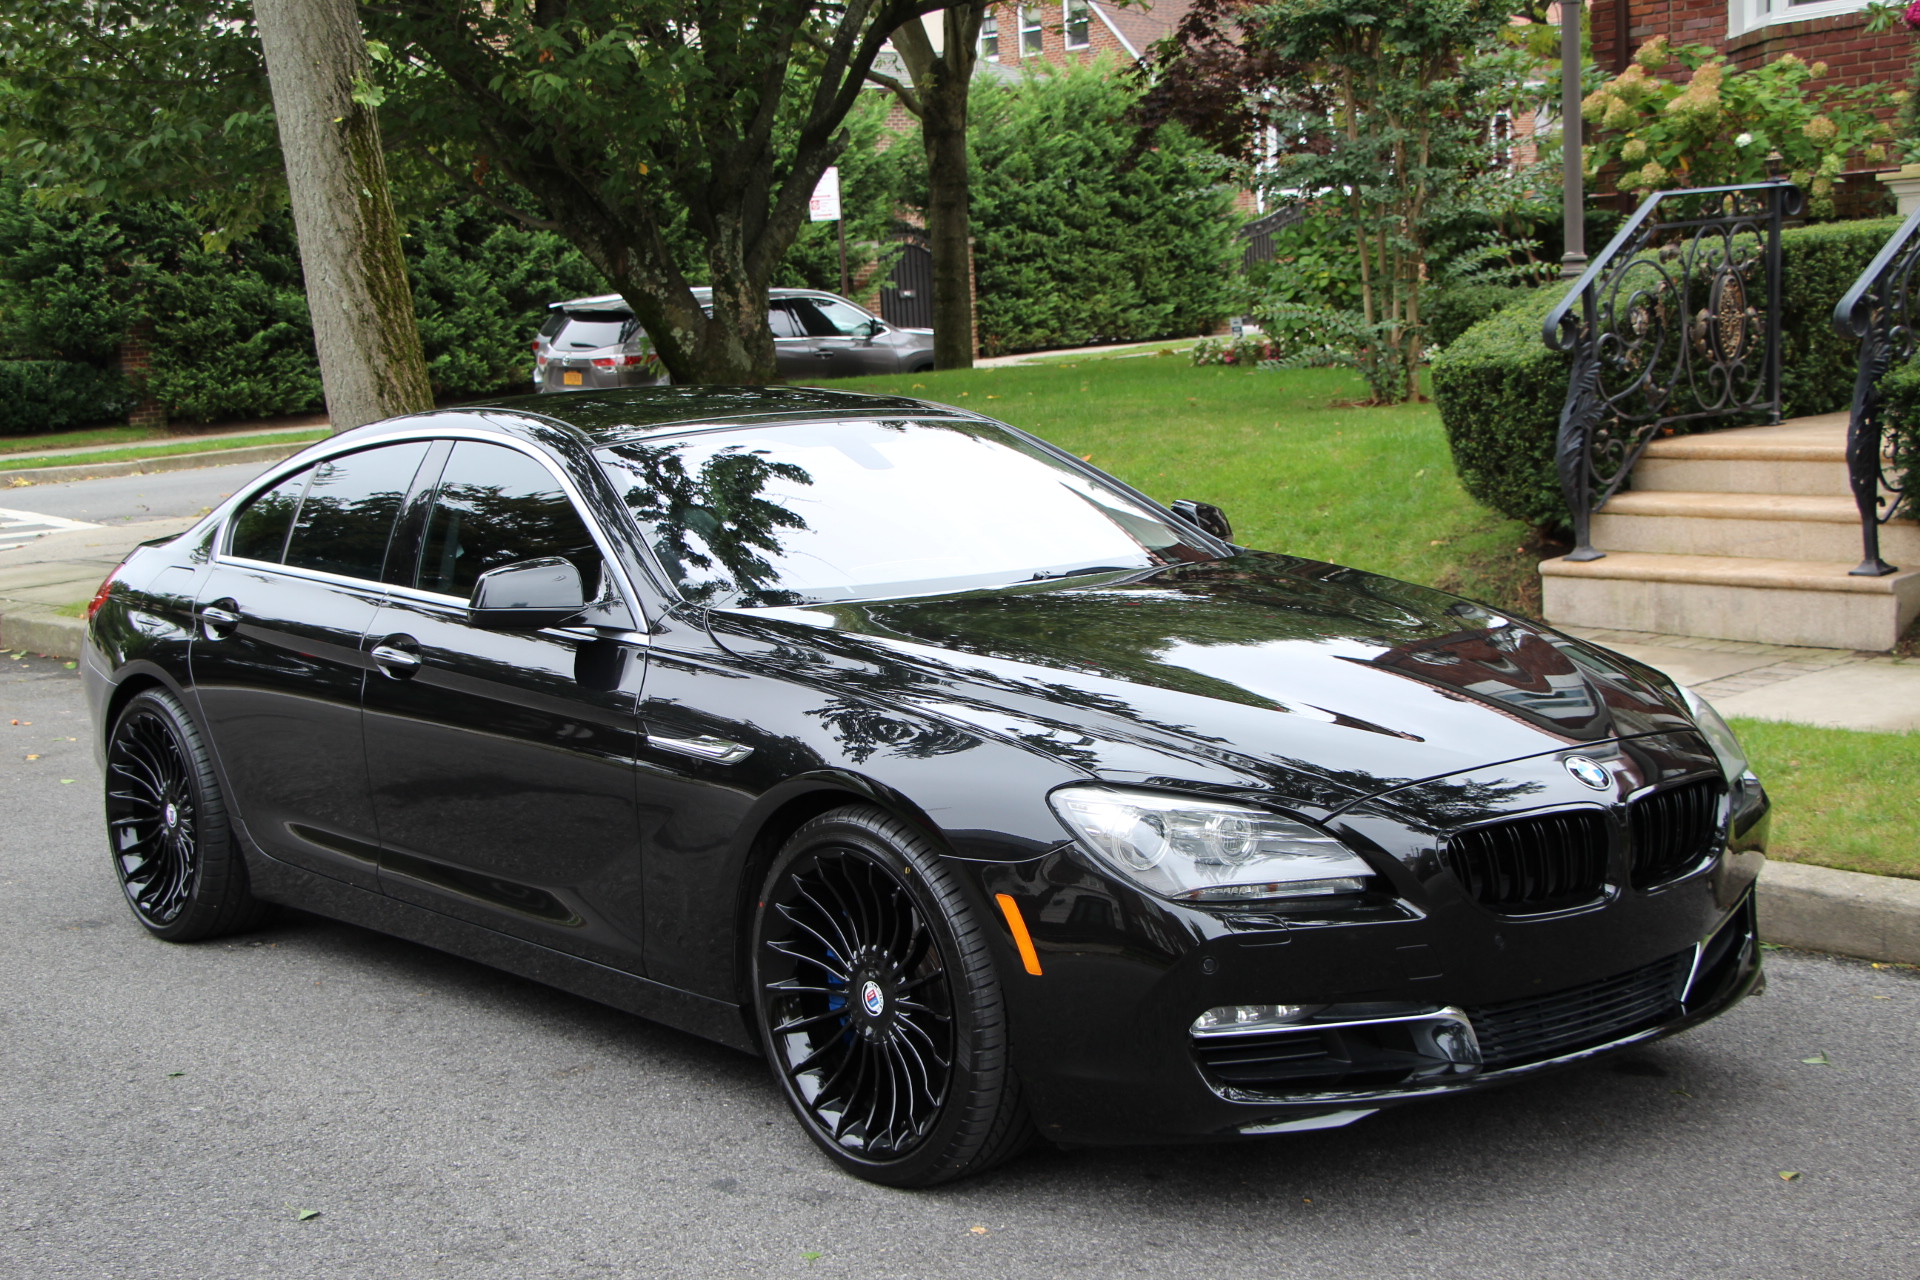 Buy Used 2013 BMW 650I GRAN COUPE for $24 900 from trusted dealer in  Brooklyn, NY!